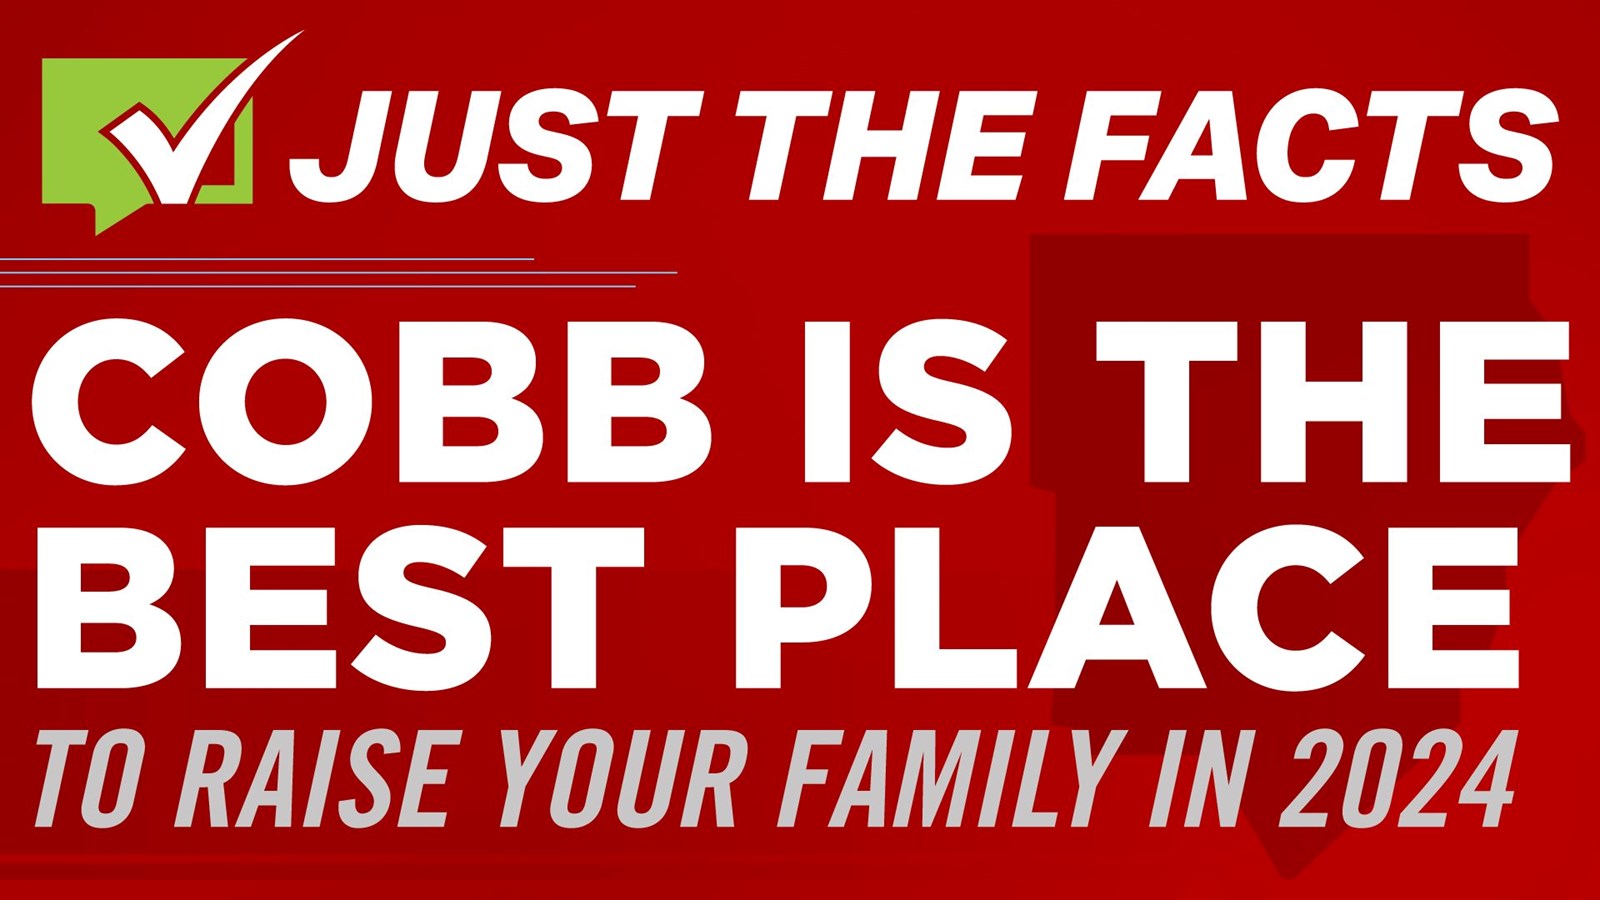 Just the Facts: Cobb is the Best Place to Raise Your Family in 2024